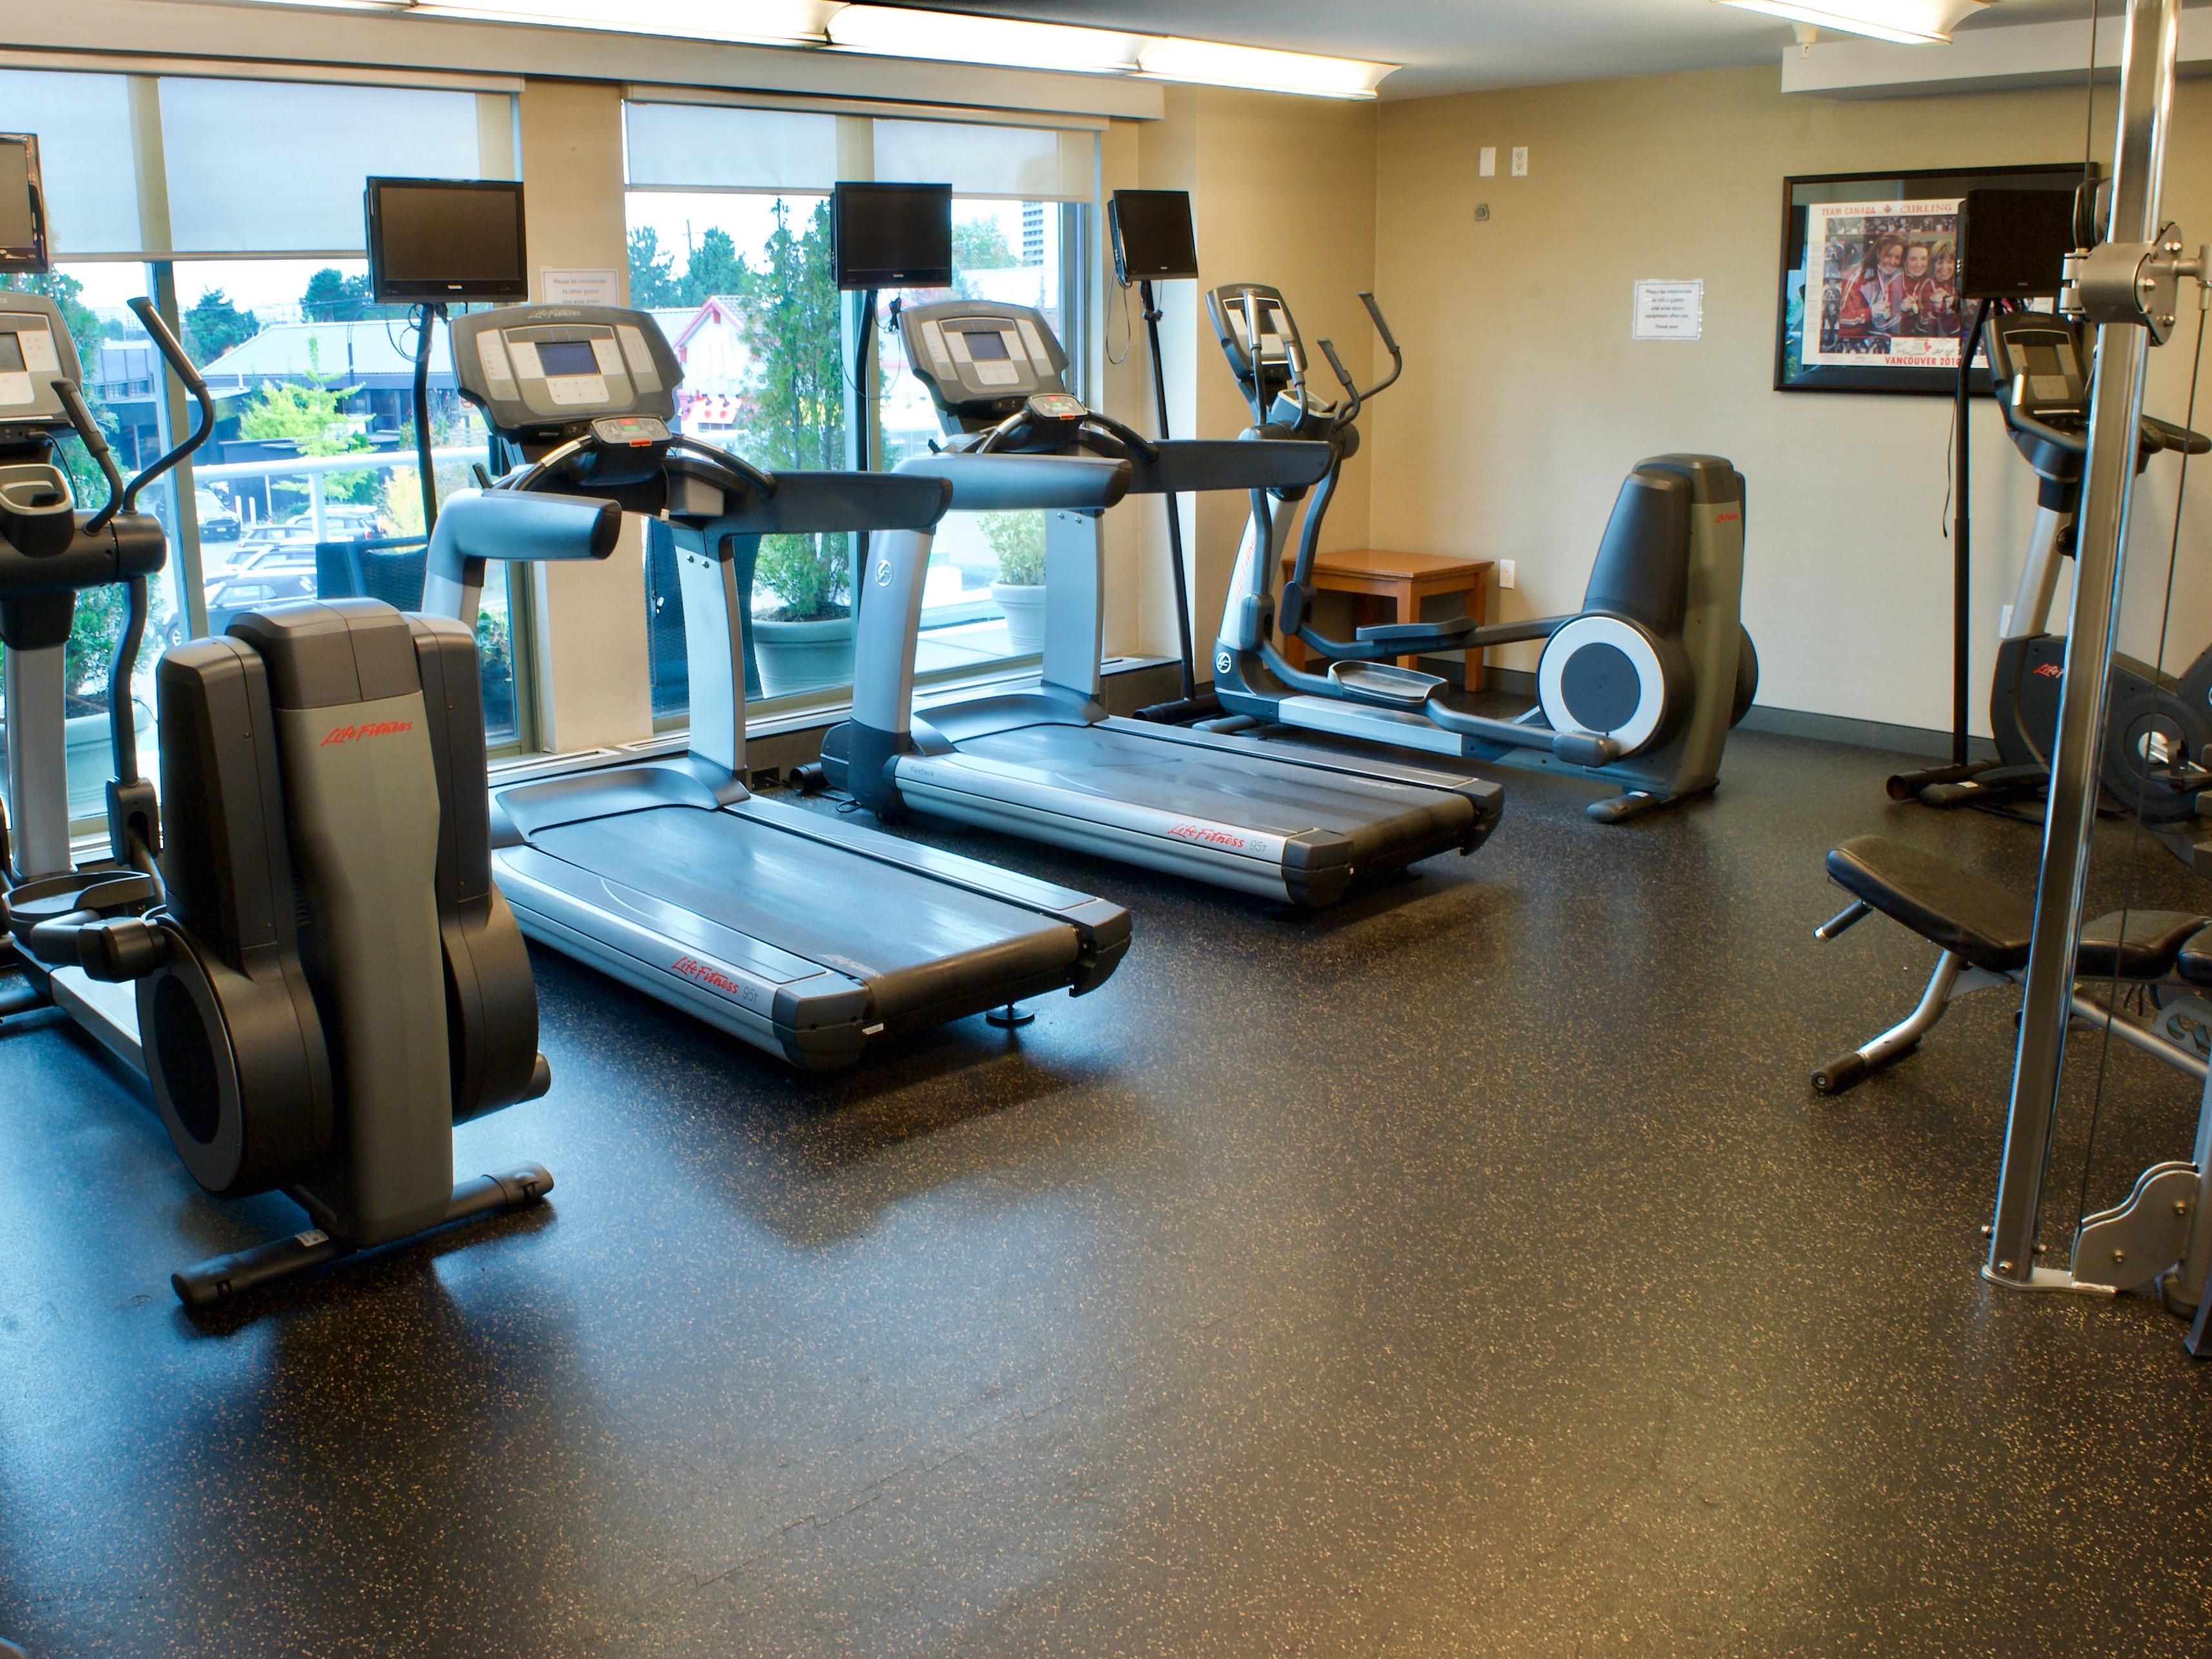 Get a great workout in our state-of-the-art Fitness Center.